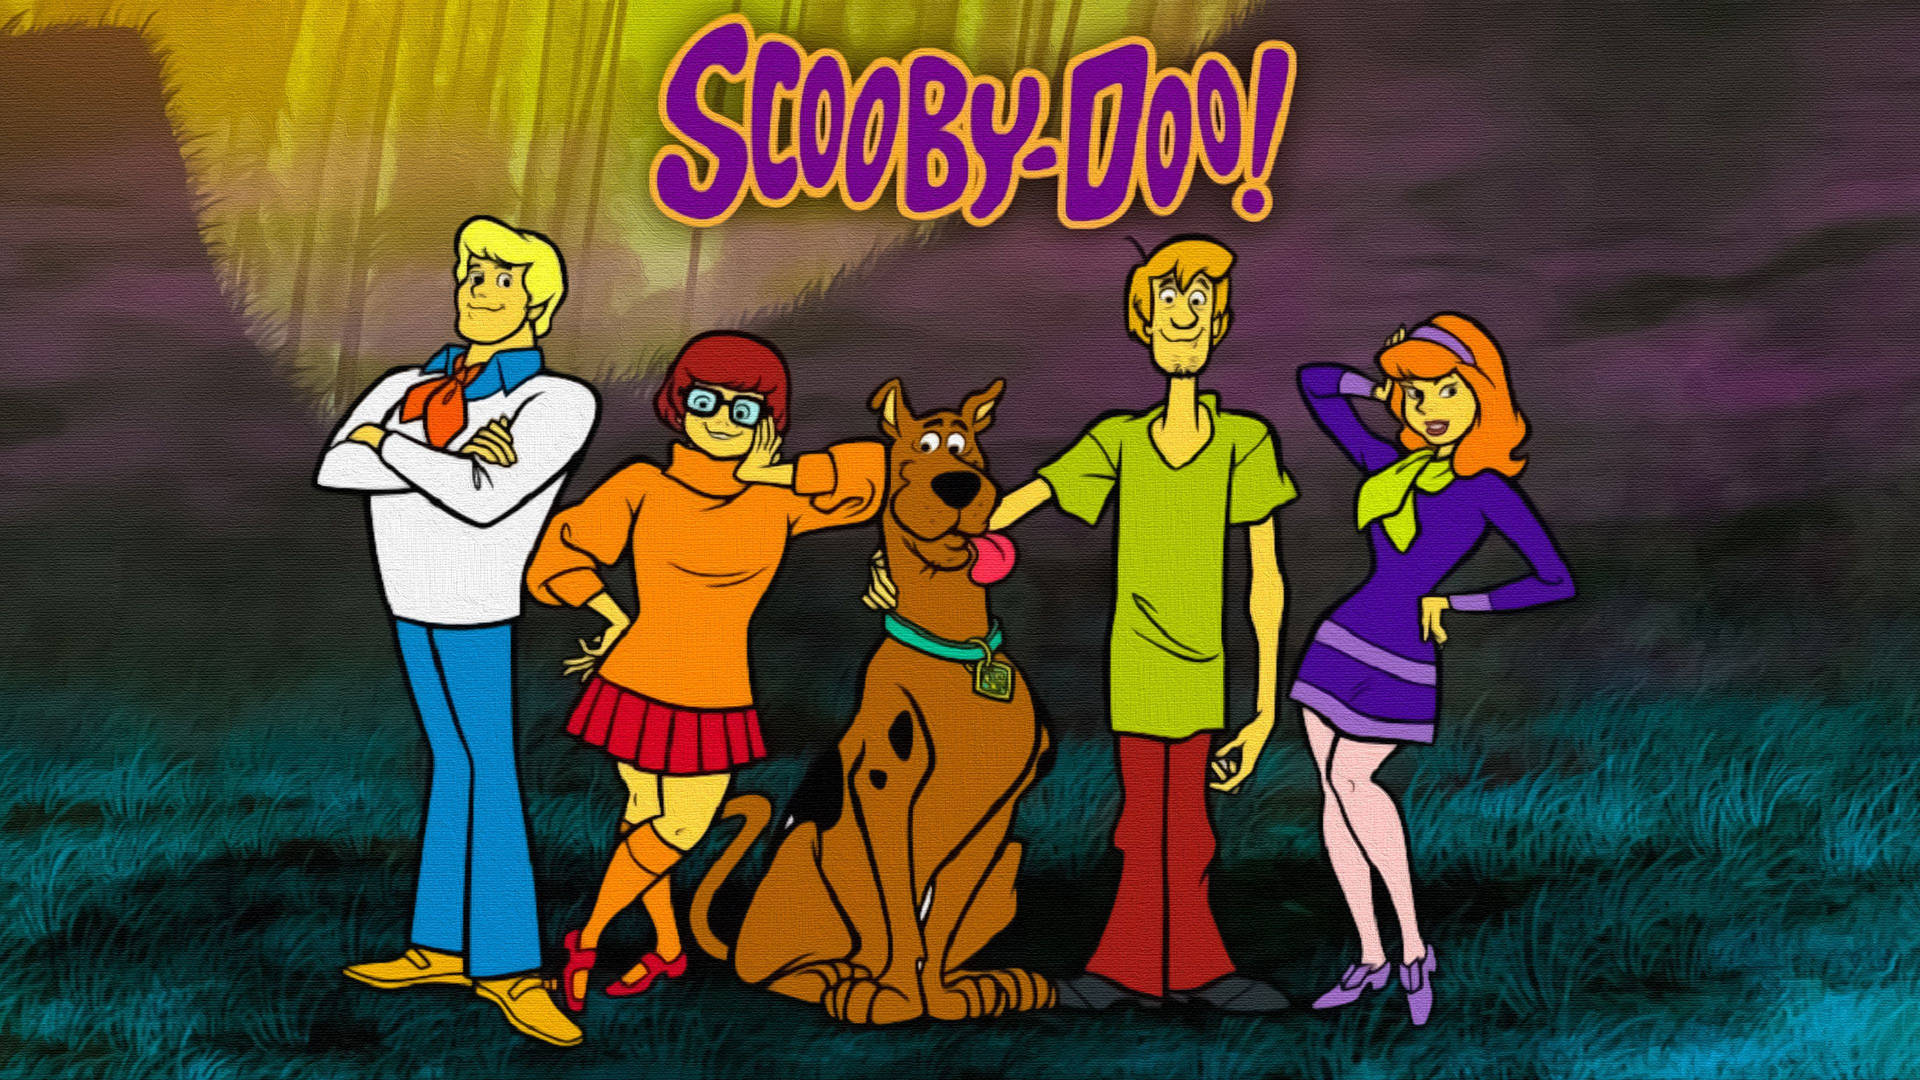 Scooby Doo In The Forest Wallpaper